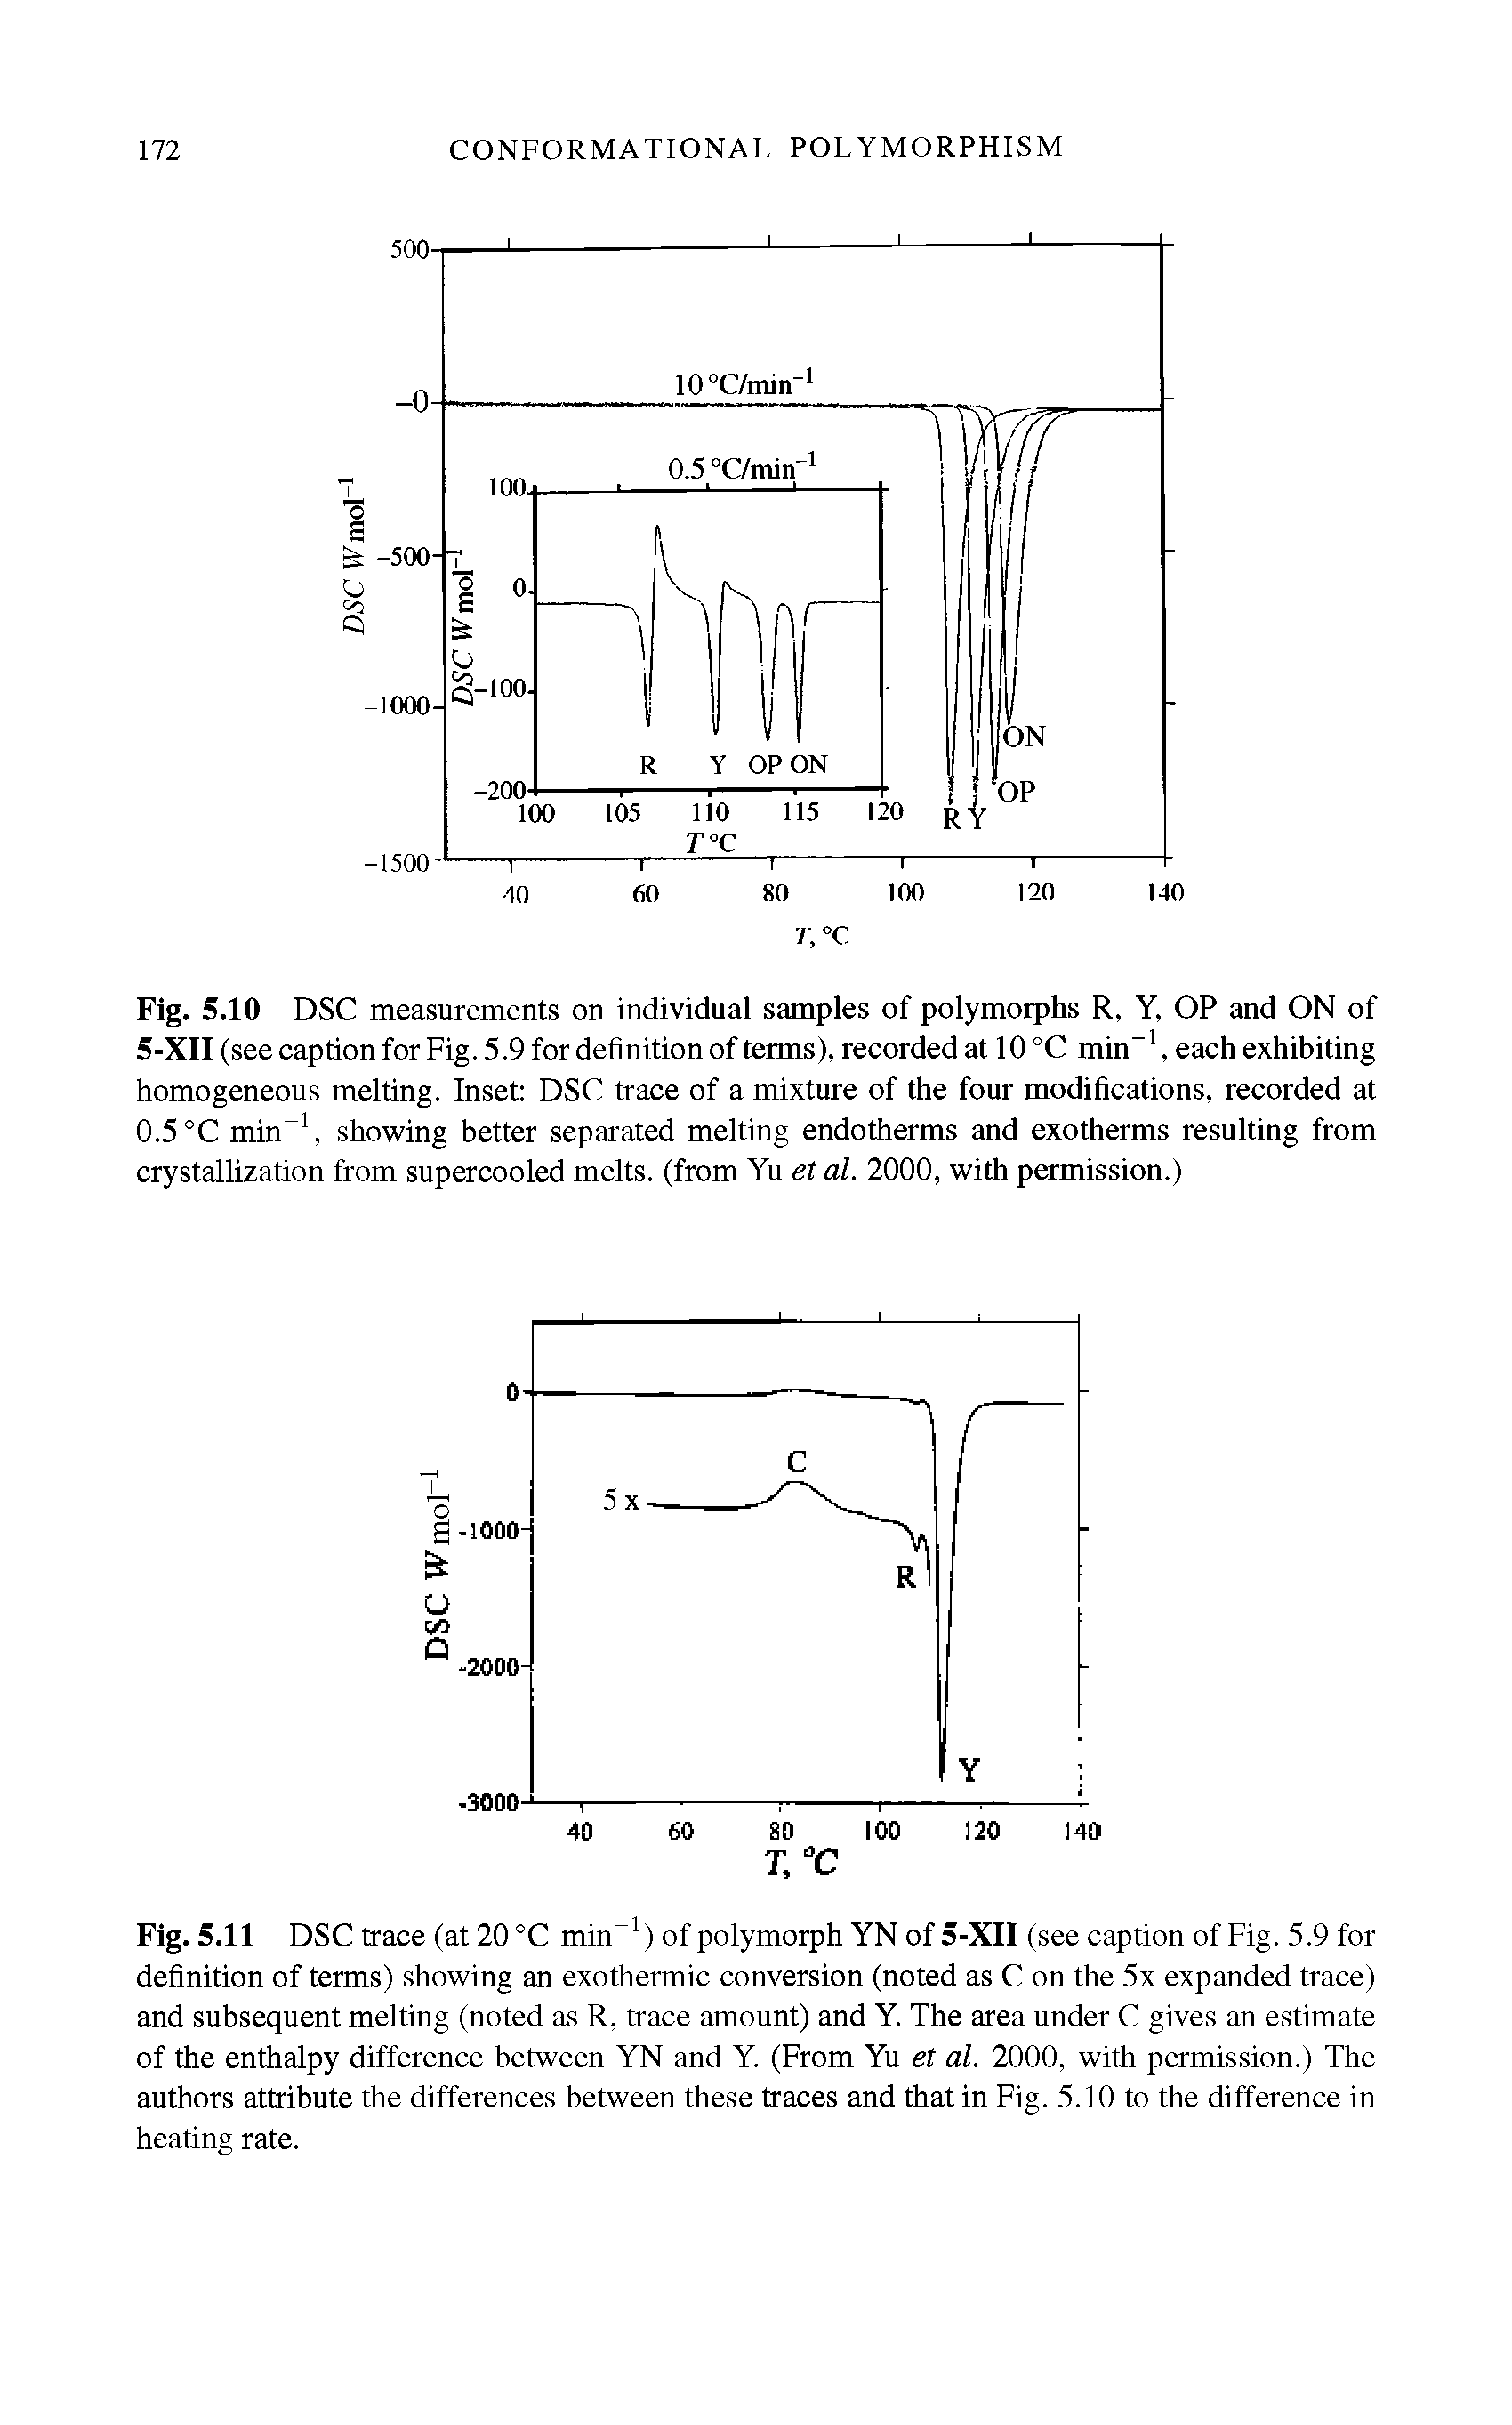 Fig. 5.10 DSC measurements on individual samples of polymorphs R, Y, OP and ON of 5-XII (see caption for Fig. 5.9 for definition of terms), recorded at 10 °C min , each exhibiting homogeneous melting. Inset DSC trace of a mixture of the four modifications, recorded at 0.5 °C min, showing better separated melting endotherms and exotherms resulting from crystallization from supercooled melts, (from Yu et al. 2000, with permission.)...